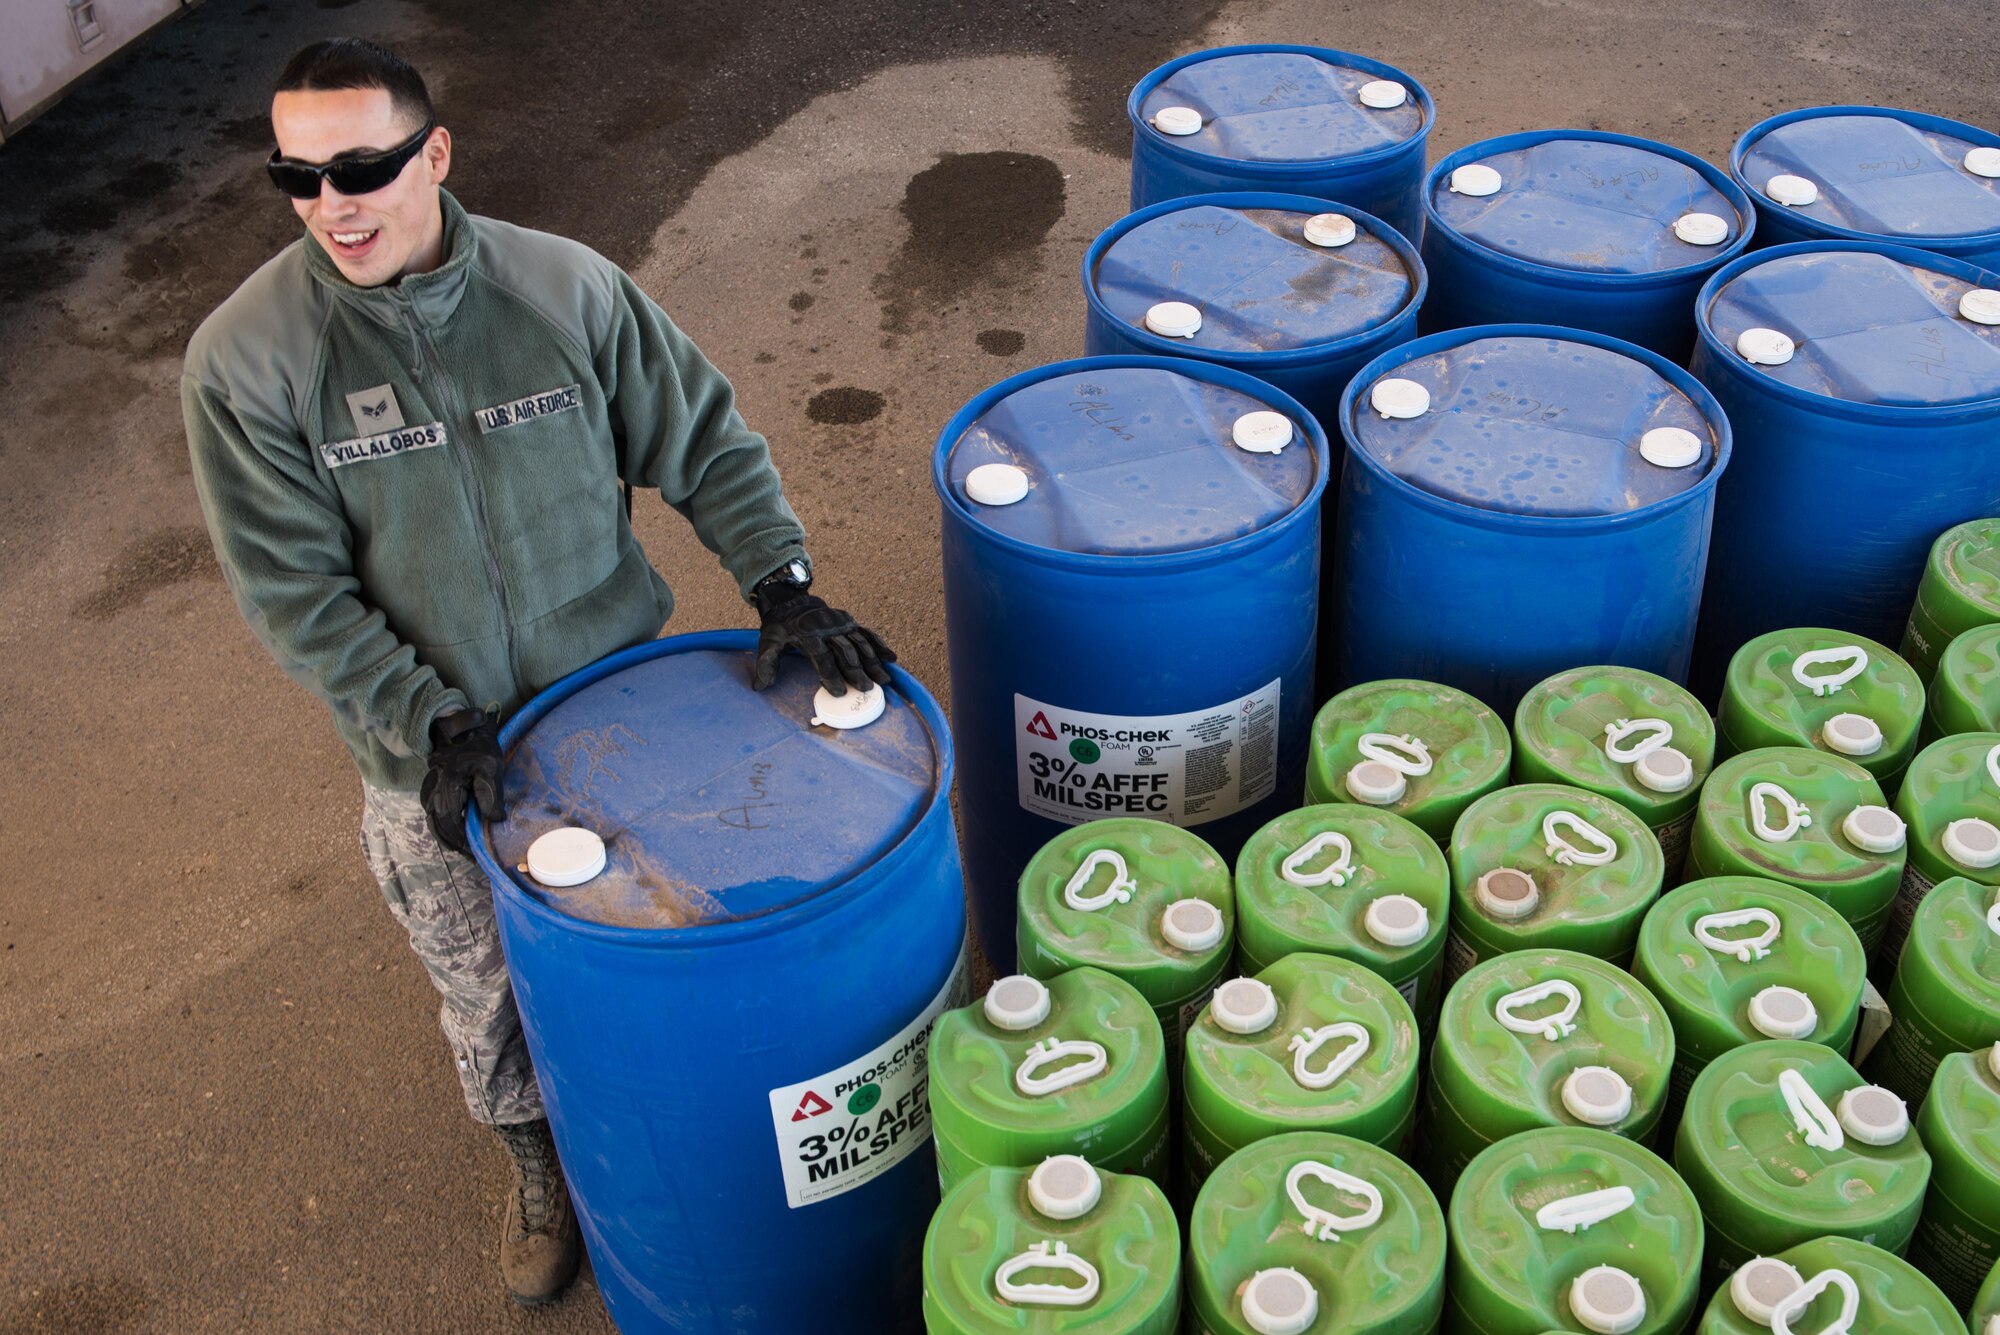 Senior Airman Francisco Villalobos, 407th Expeditionary Civil Engineer Squadron firefighter, moves a 55-gallon drum while transferring fire retardant from a foam trailer at the 407th Air Expeditionary Group, Jan. 6, 2016. The unit switched all the fire retardant foam in their inventory as part of an Air Force-wide initiative to use more environmentally friendly foam. (U.S. Air Force photo/Master Sgt. Benjamin Wilson)(Released)